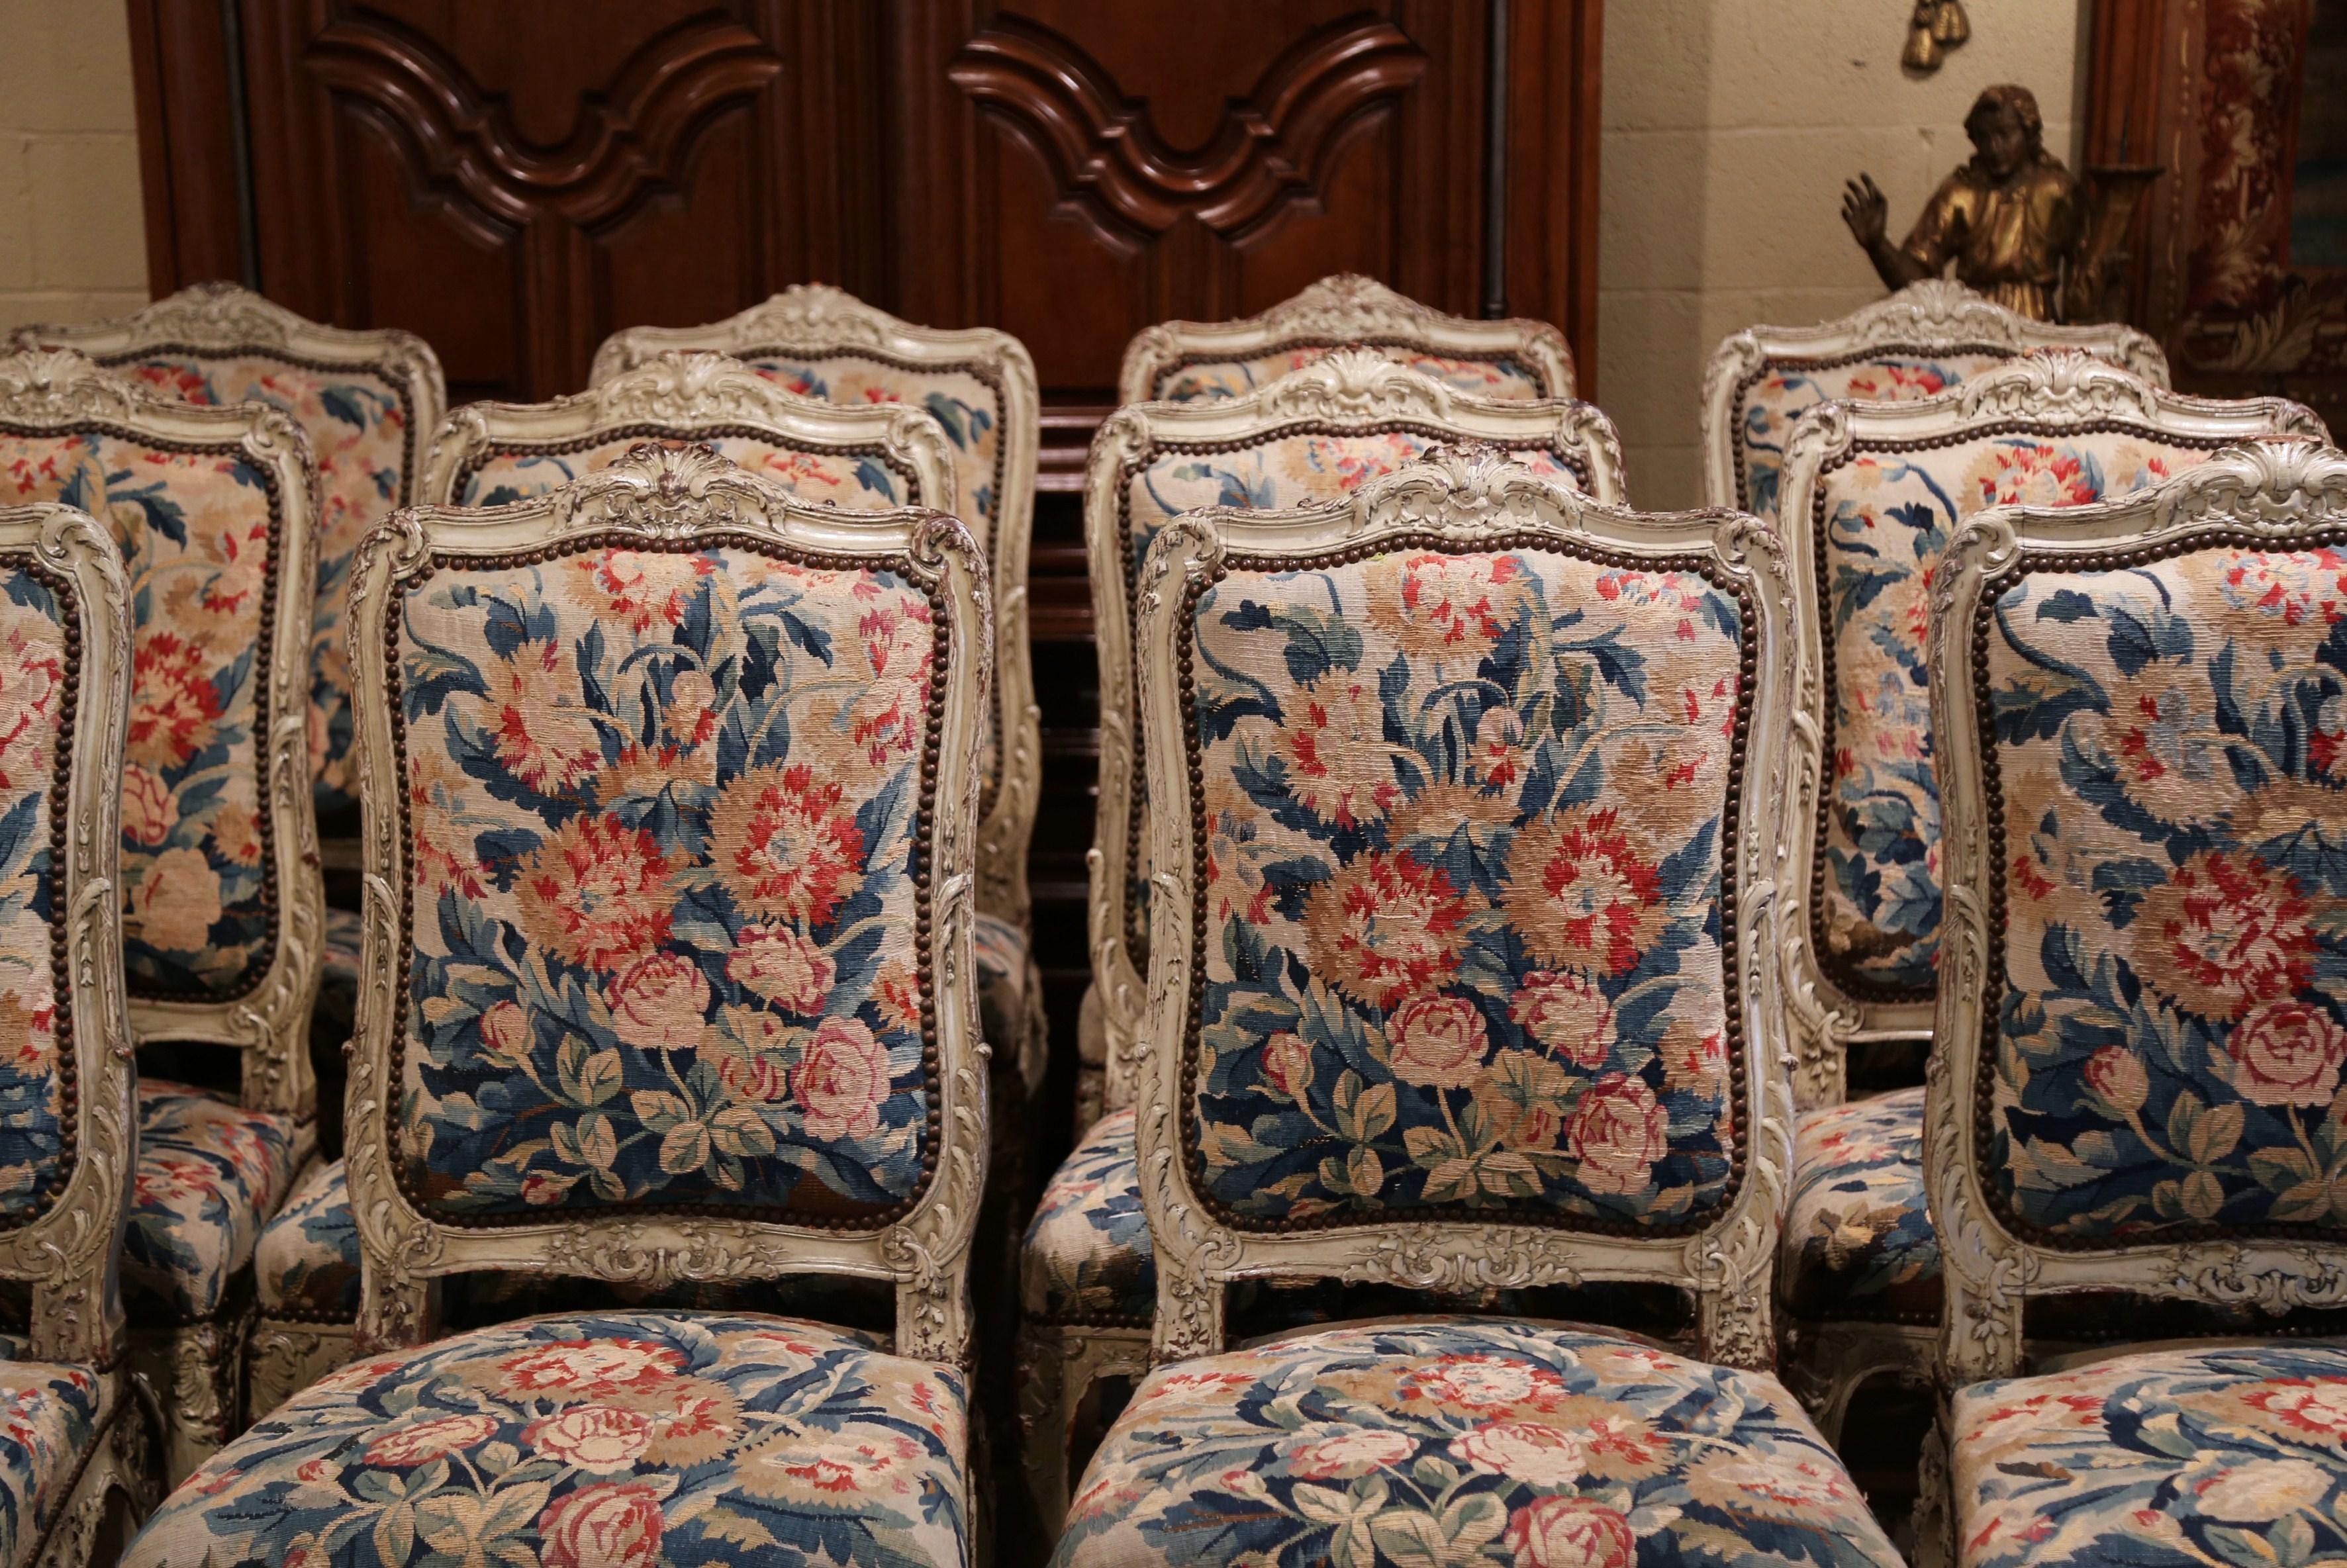 French 19th Century Carved Painted Dining Room Chairs with Aubusson Tapestry -Set of 12